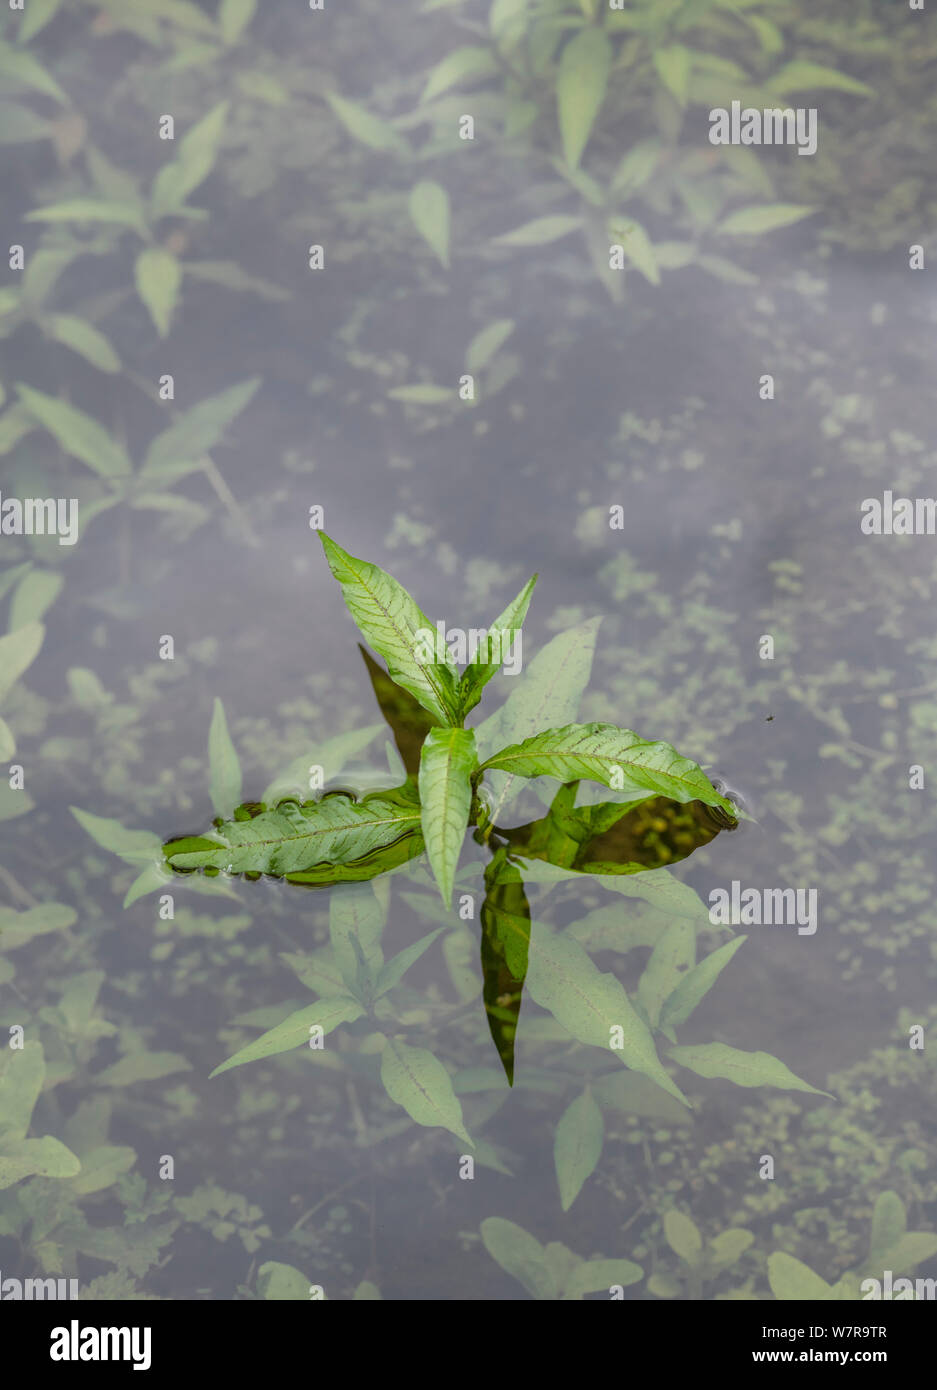 Foliage of Water Pepper / Polygonum hydropiper syn. Persicaria hydropiper submerged at river's edge. Once used as medicinal plant in herbal remedies. Stock Photo